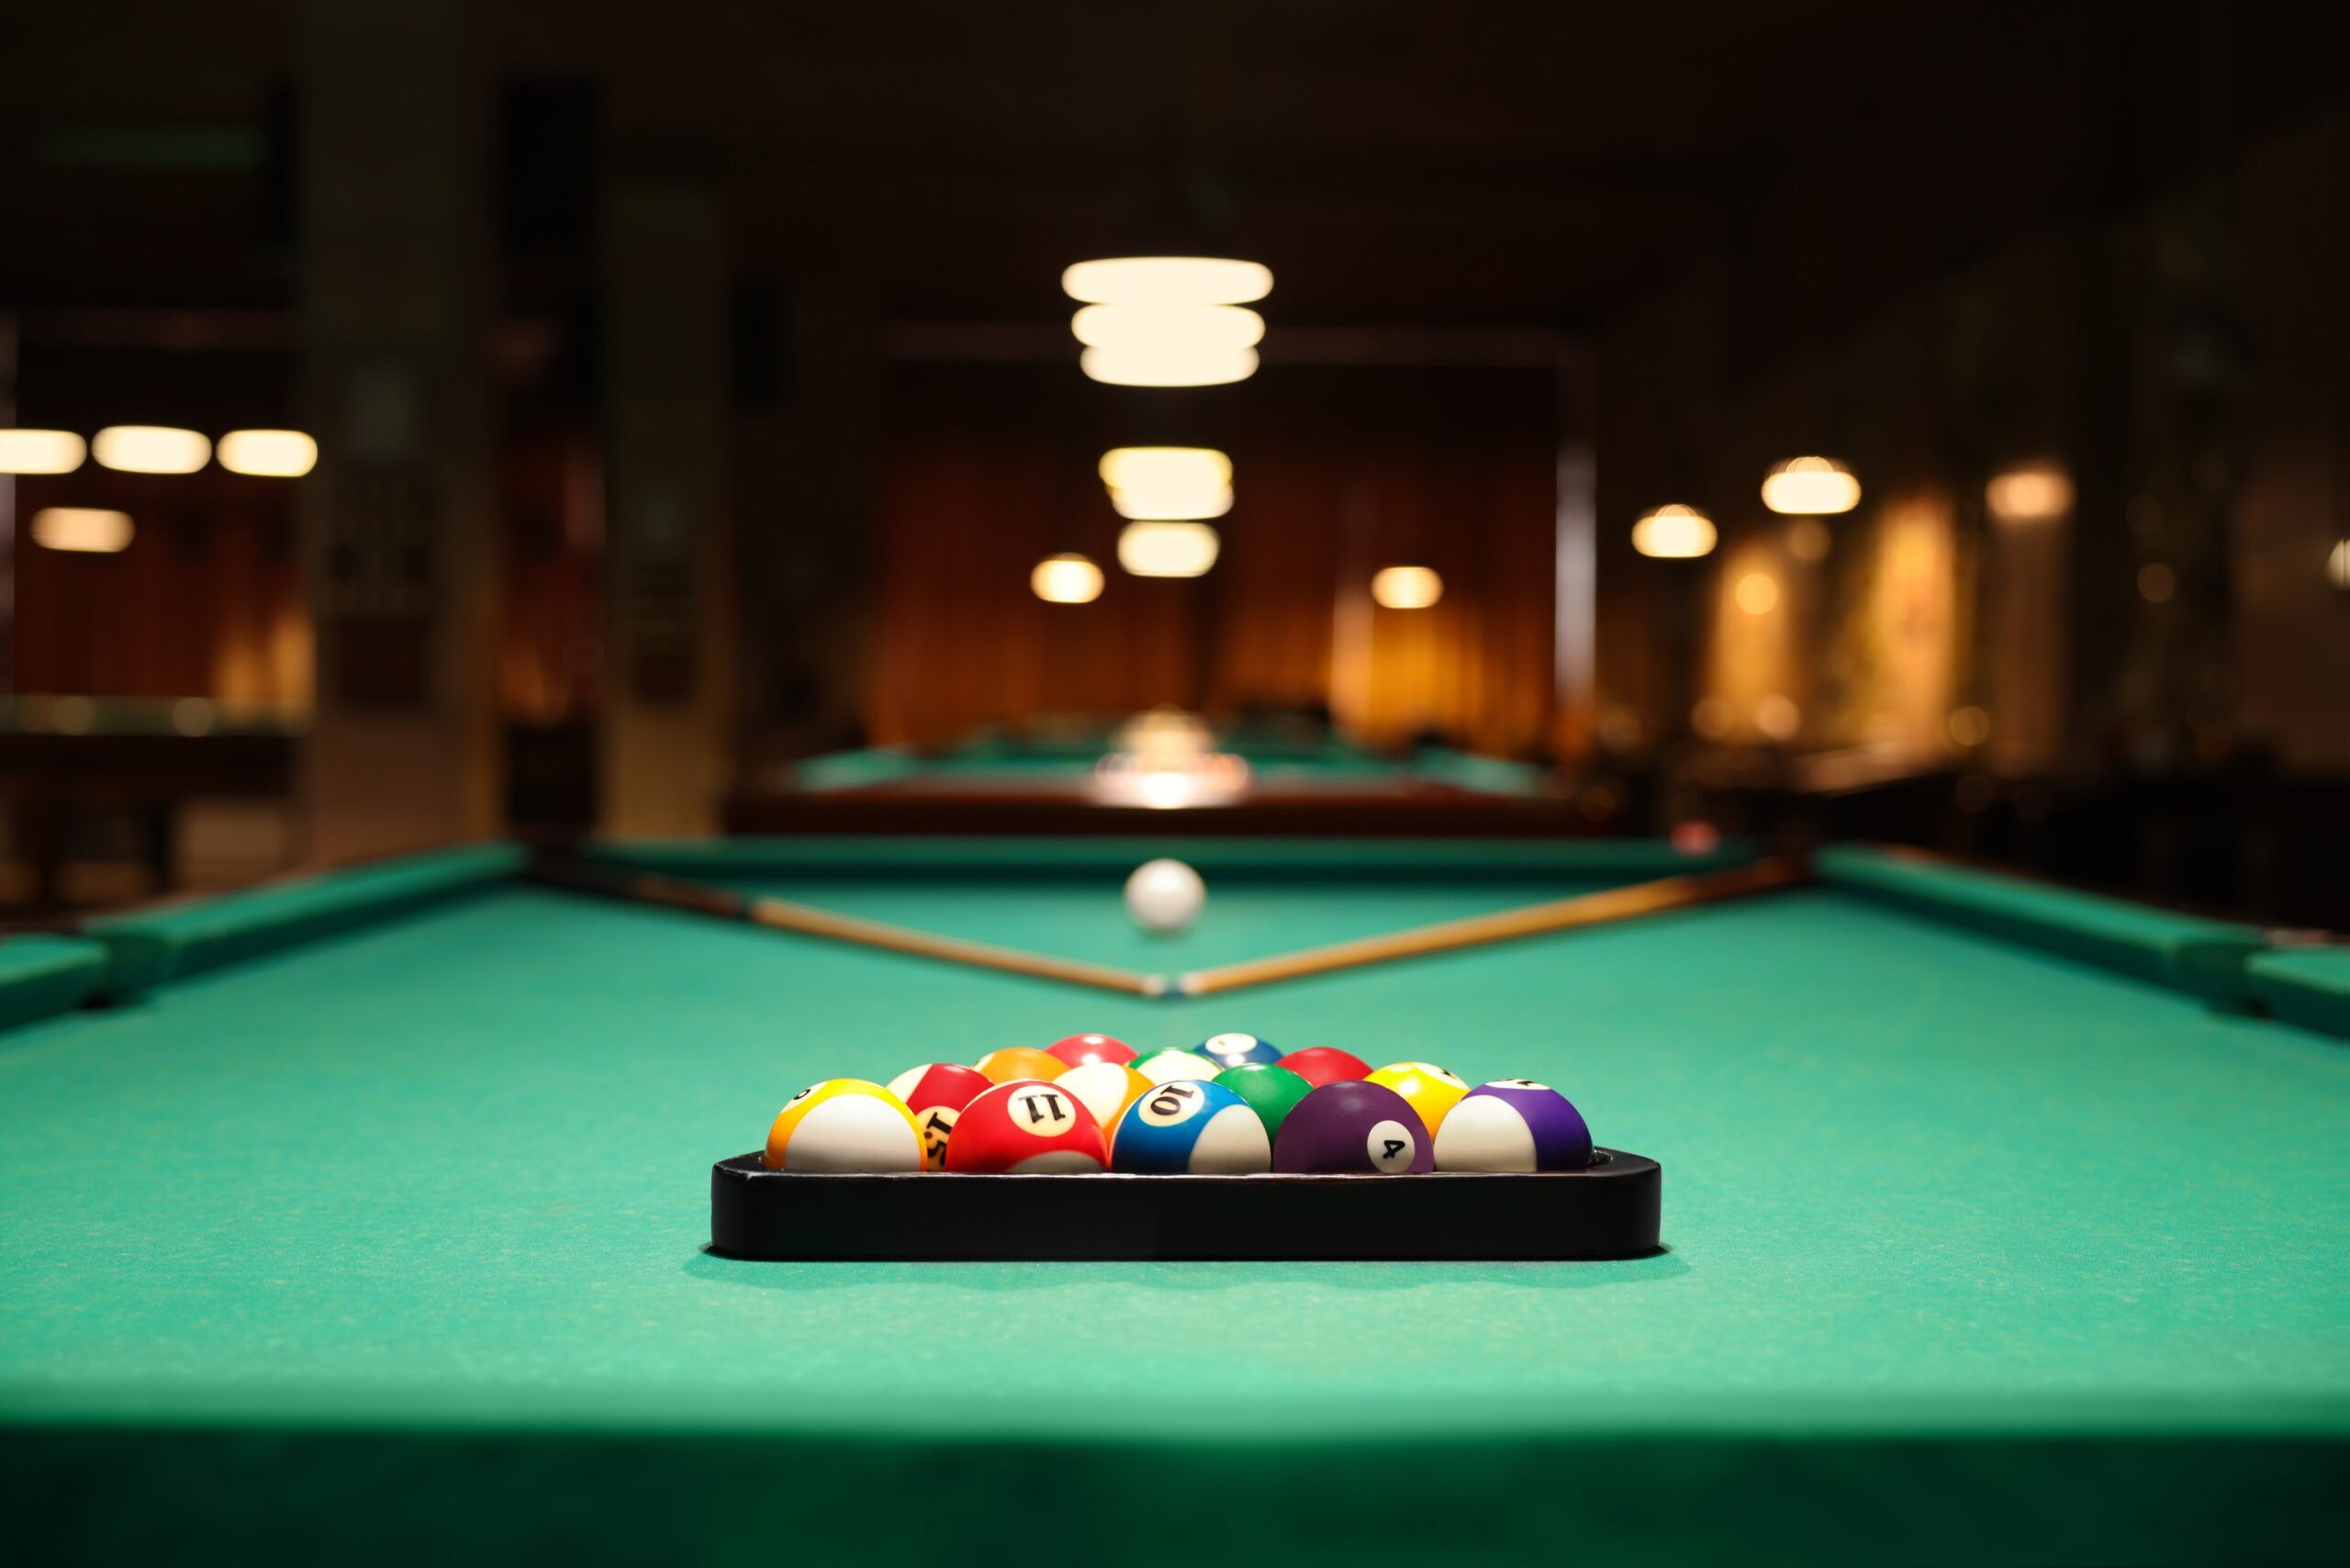 Plastic triangle rack with billiard balls and cues on green table indoors